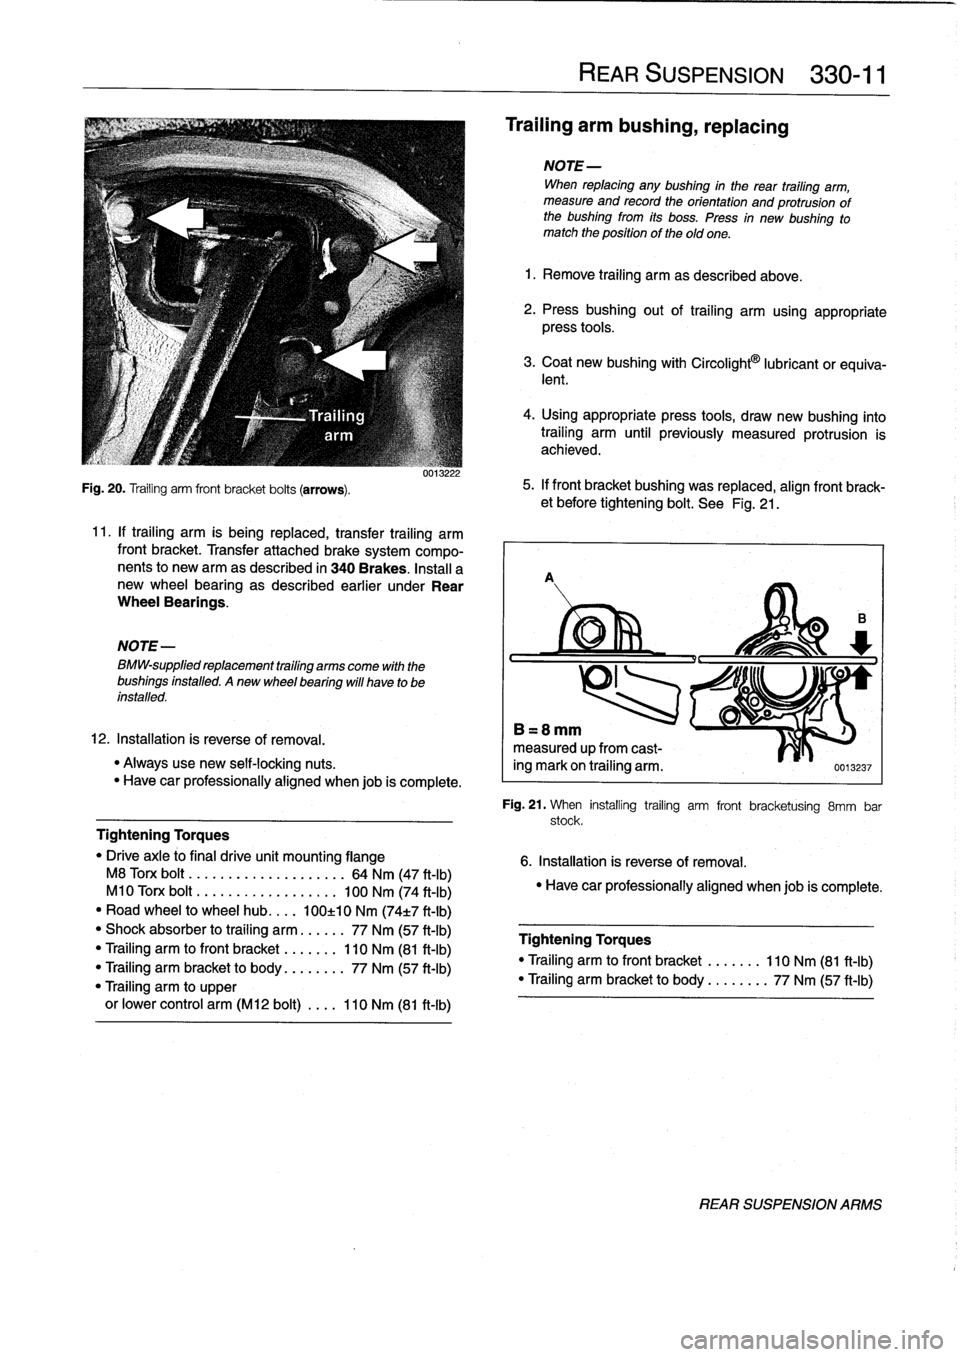 BMW 318i 1995 E36 Owners Guide 
Fig
.
20
.
Trailing
arm
front
bracket
bolts
(arrows)
.

NOTE-

BMW-supplied
replacement
trailing
arms
come
with
the
bushings
installed
.
Anew
wheel
bearing
will
have
to
be
installed
.

0013222

11
.
